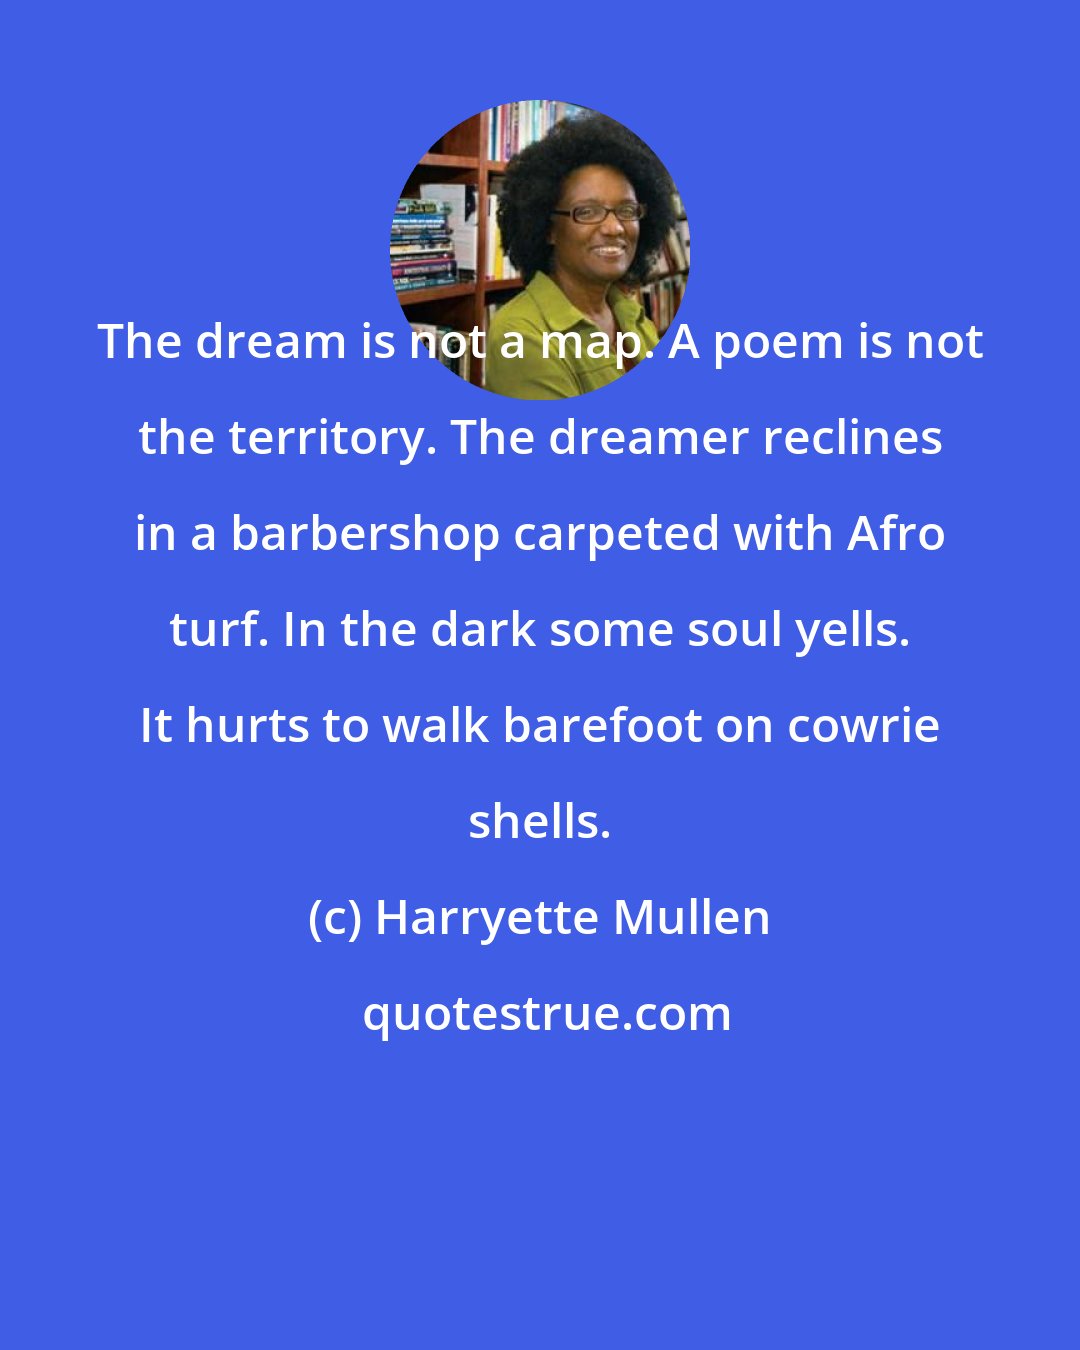 Harryette Mullen: The dream is not a map. A poem is not the territory. The dreamer reclines in a barbershop carpeted with Afro turf. In the dark some soul yells. It hurts to walk barefoot on cowrie shells.